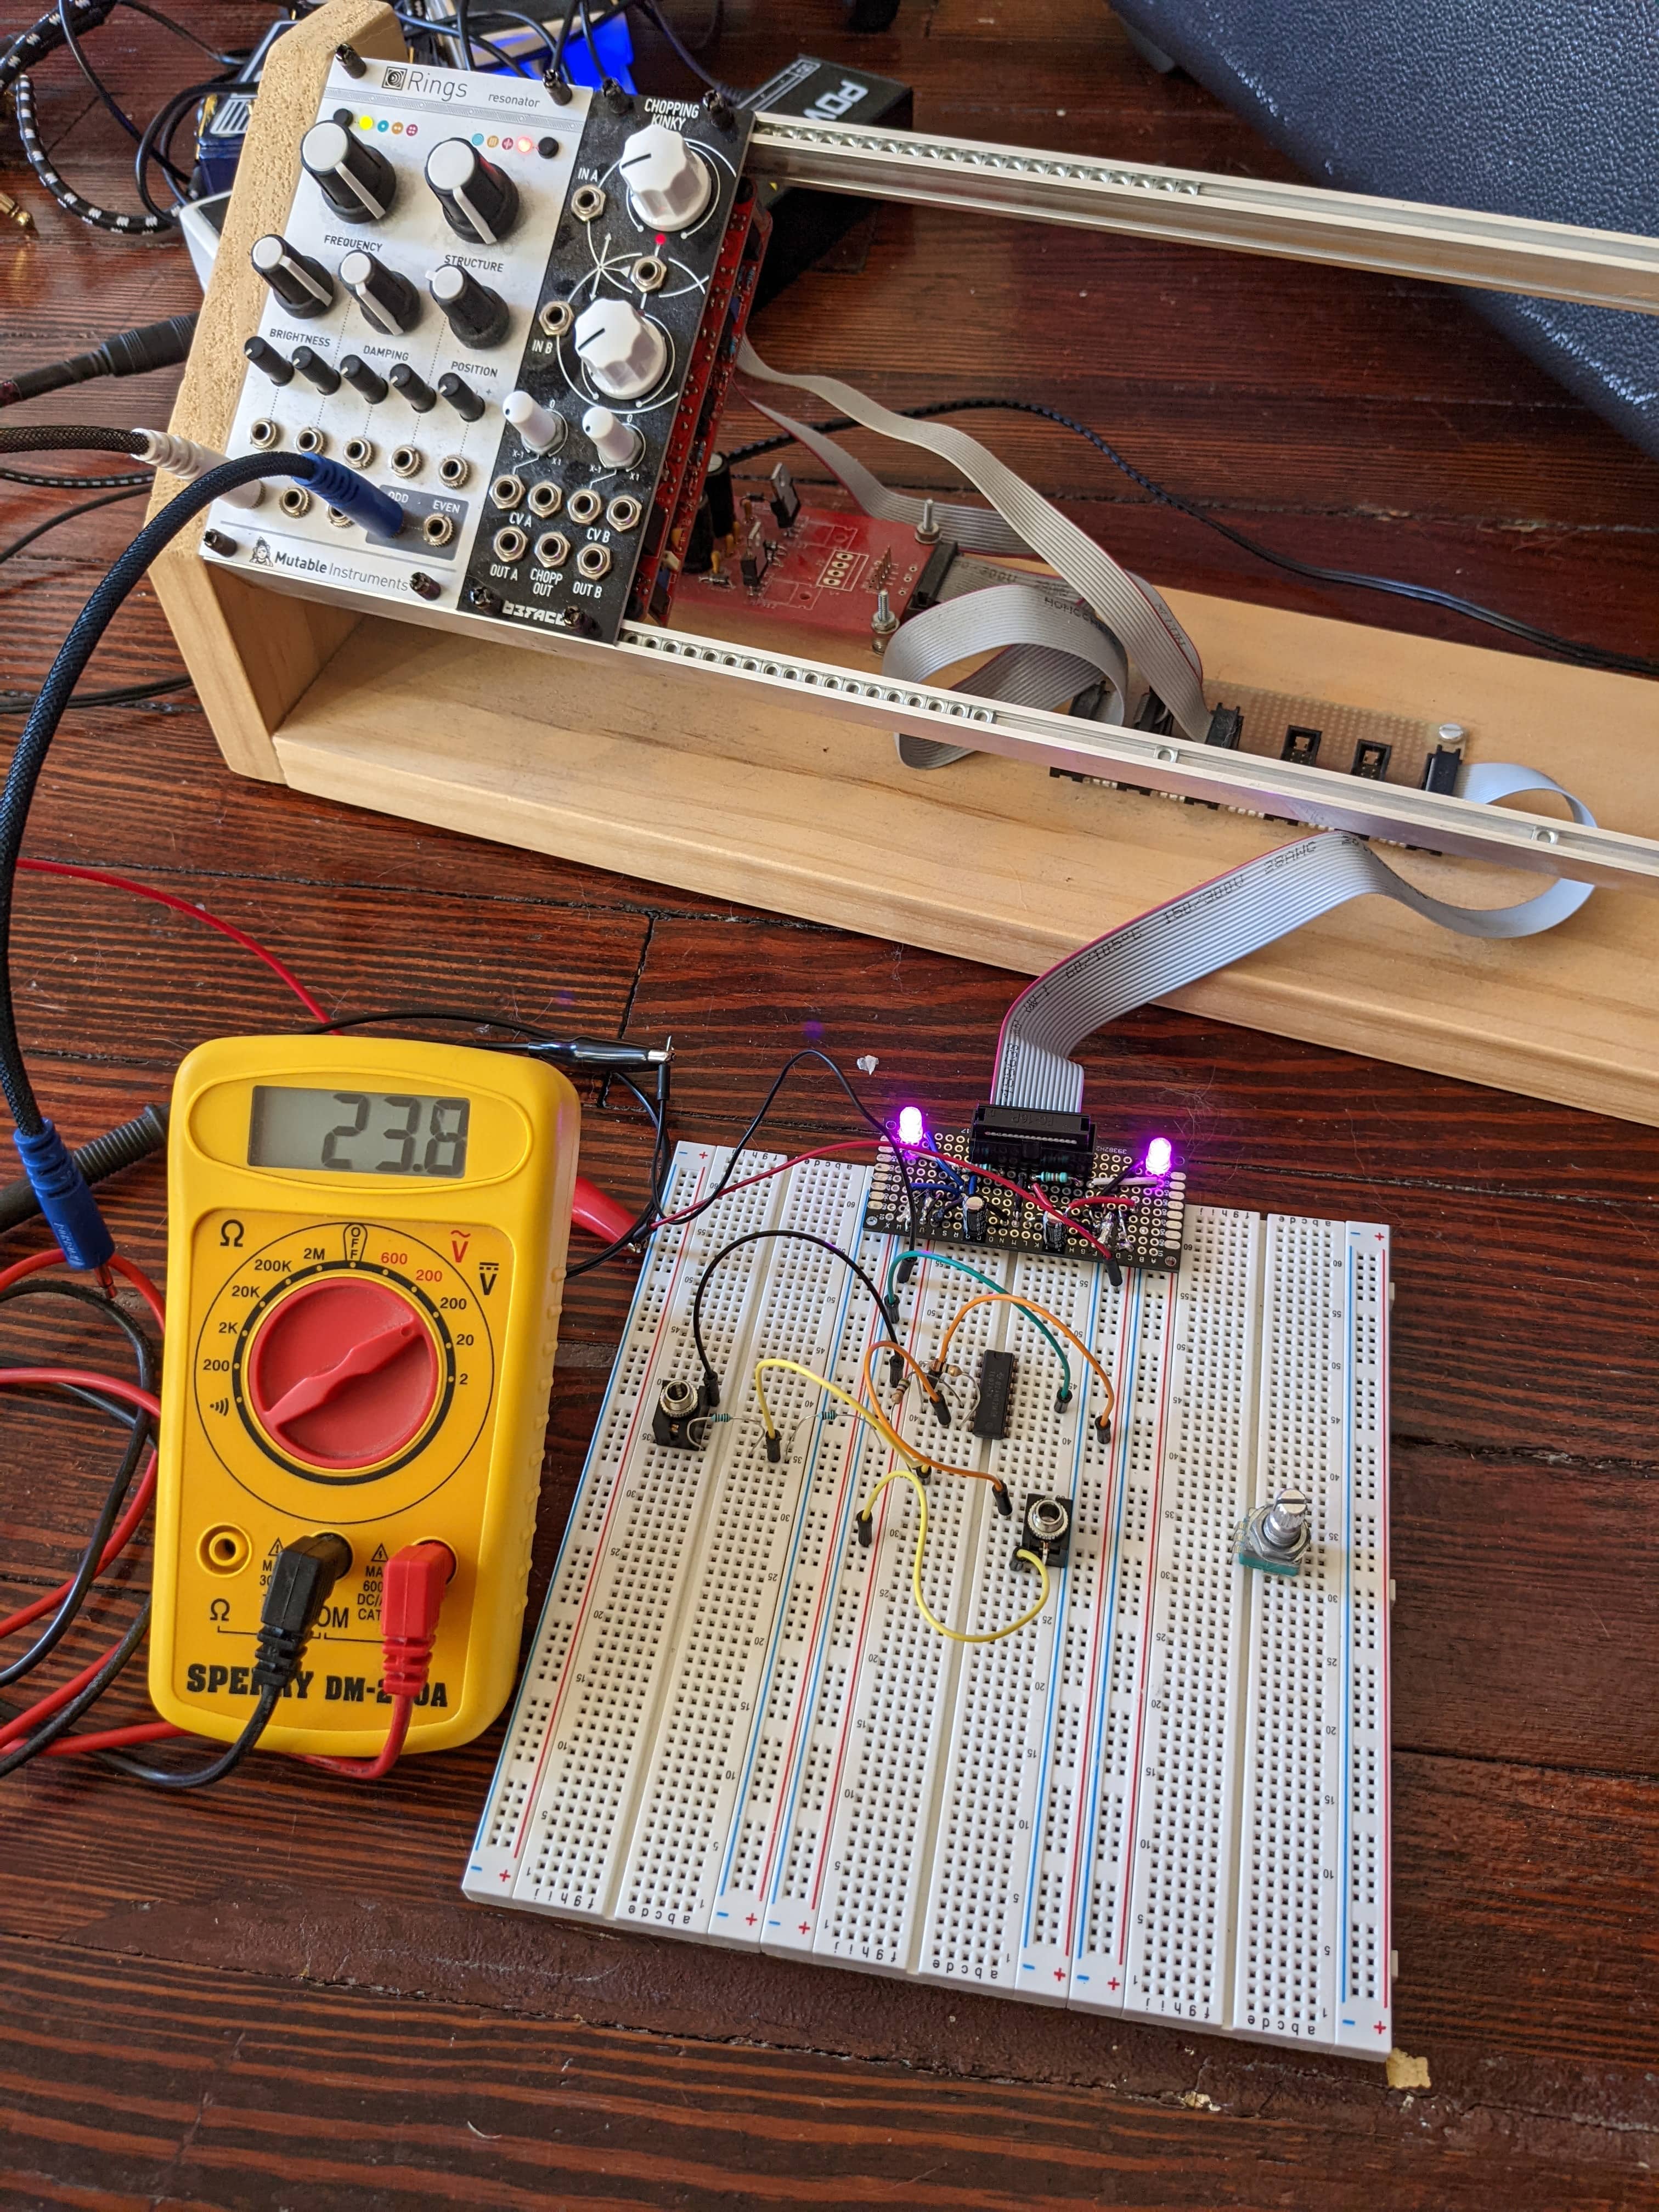 The Eurorack Breadboard Power module connected to a volt meter showing 23.8 volts